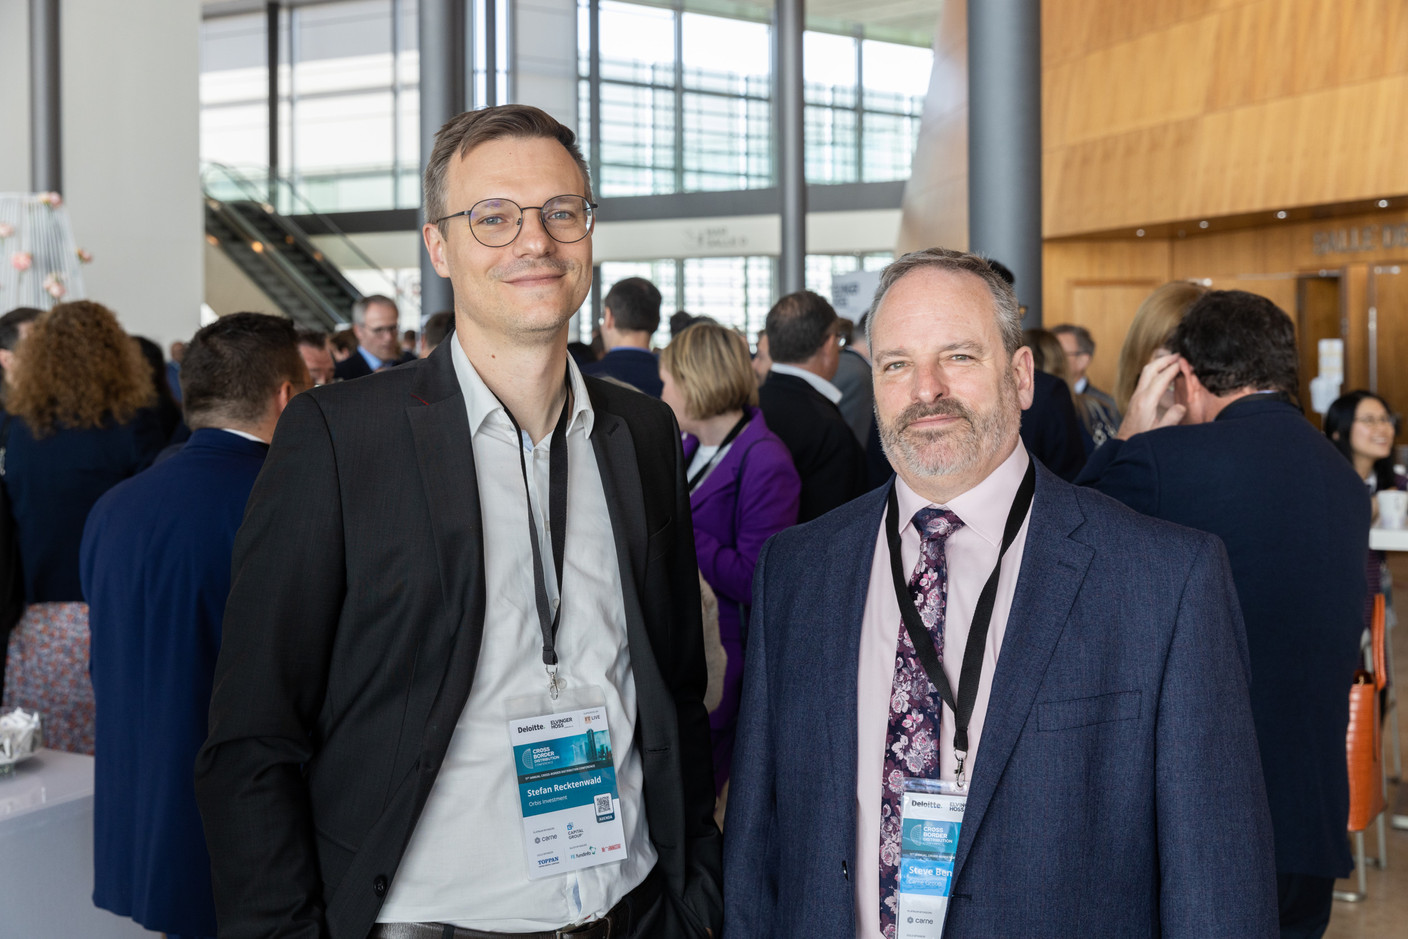 Stefan Recktenwald (Orbis Investment) and Steve Bennett (Carne Group) at the Cross-Border Distribution Conference held at the European Convention Center in Kirchberg on 25 May.  Photo: Romain Gamba/Maison Moderne